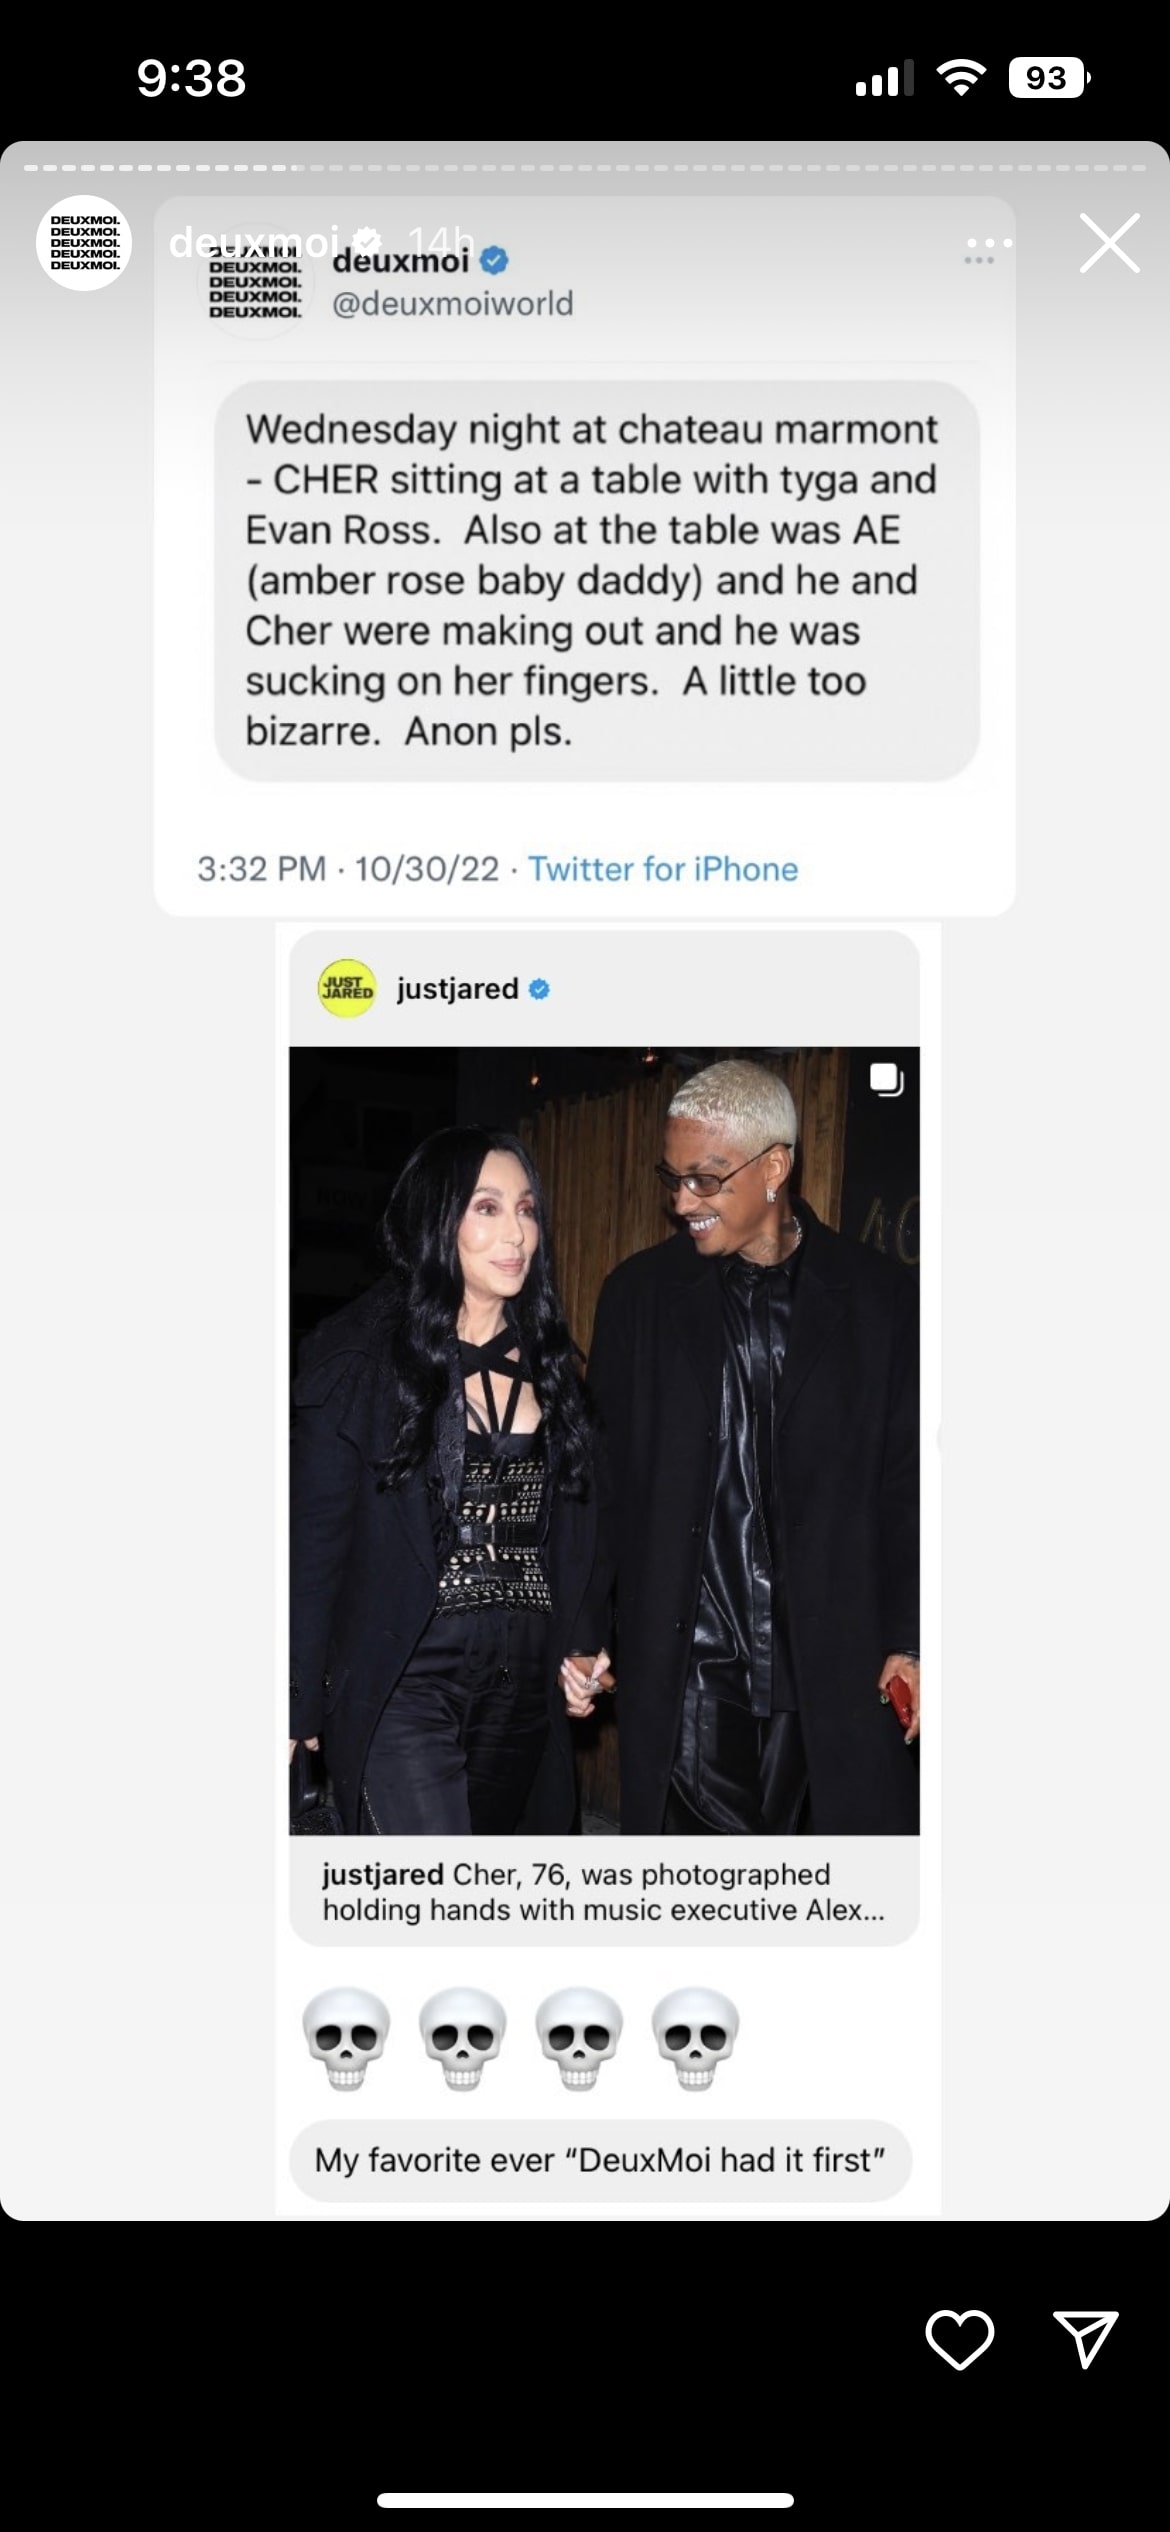 The anonymous tip received by Deuxmoi about Cher and Alexander 'AE' Edwards